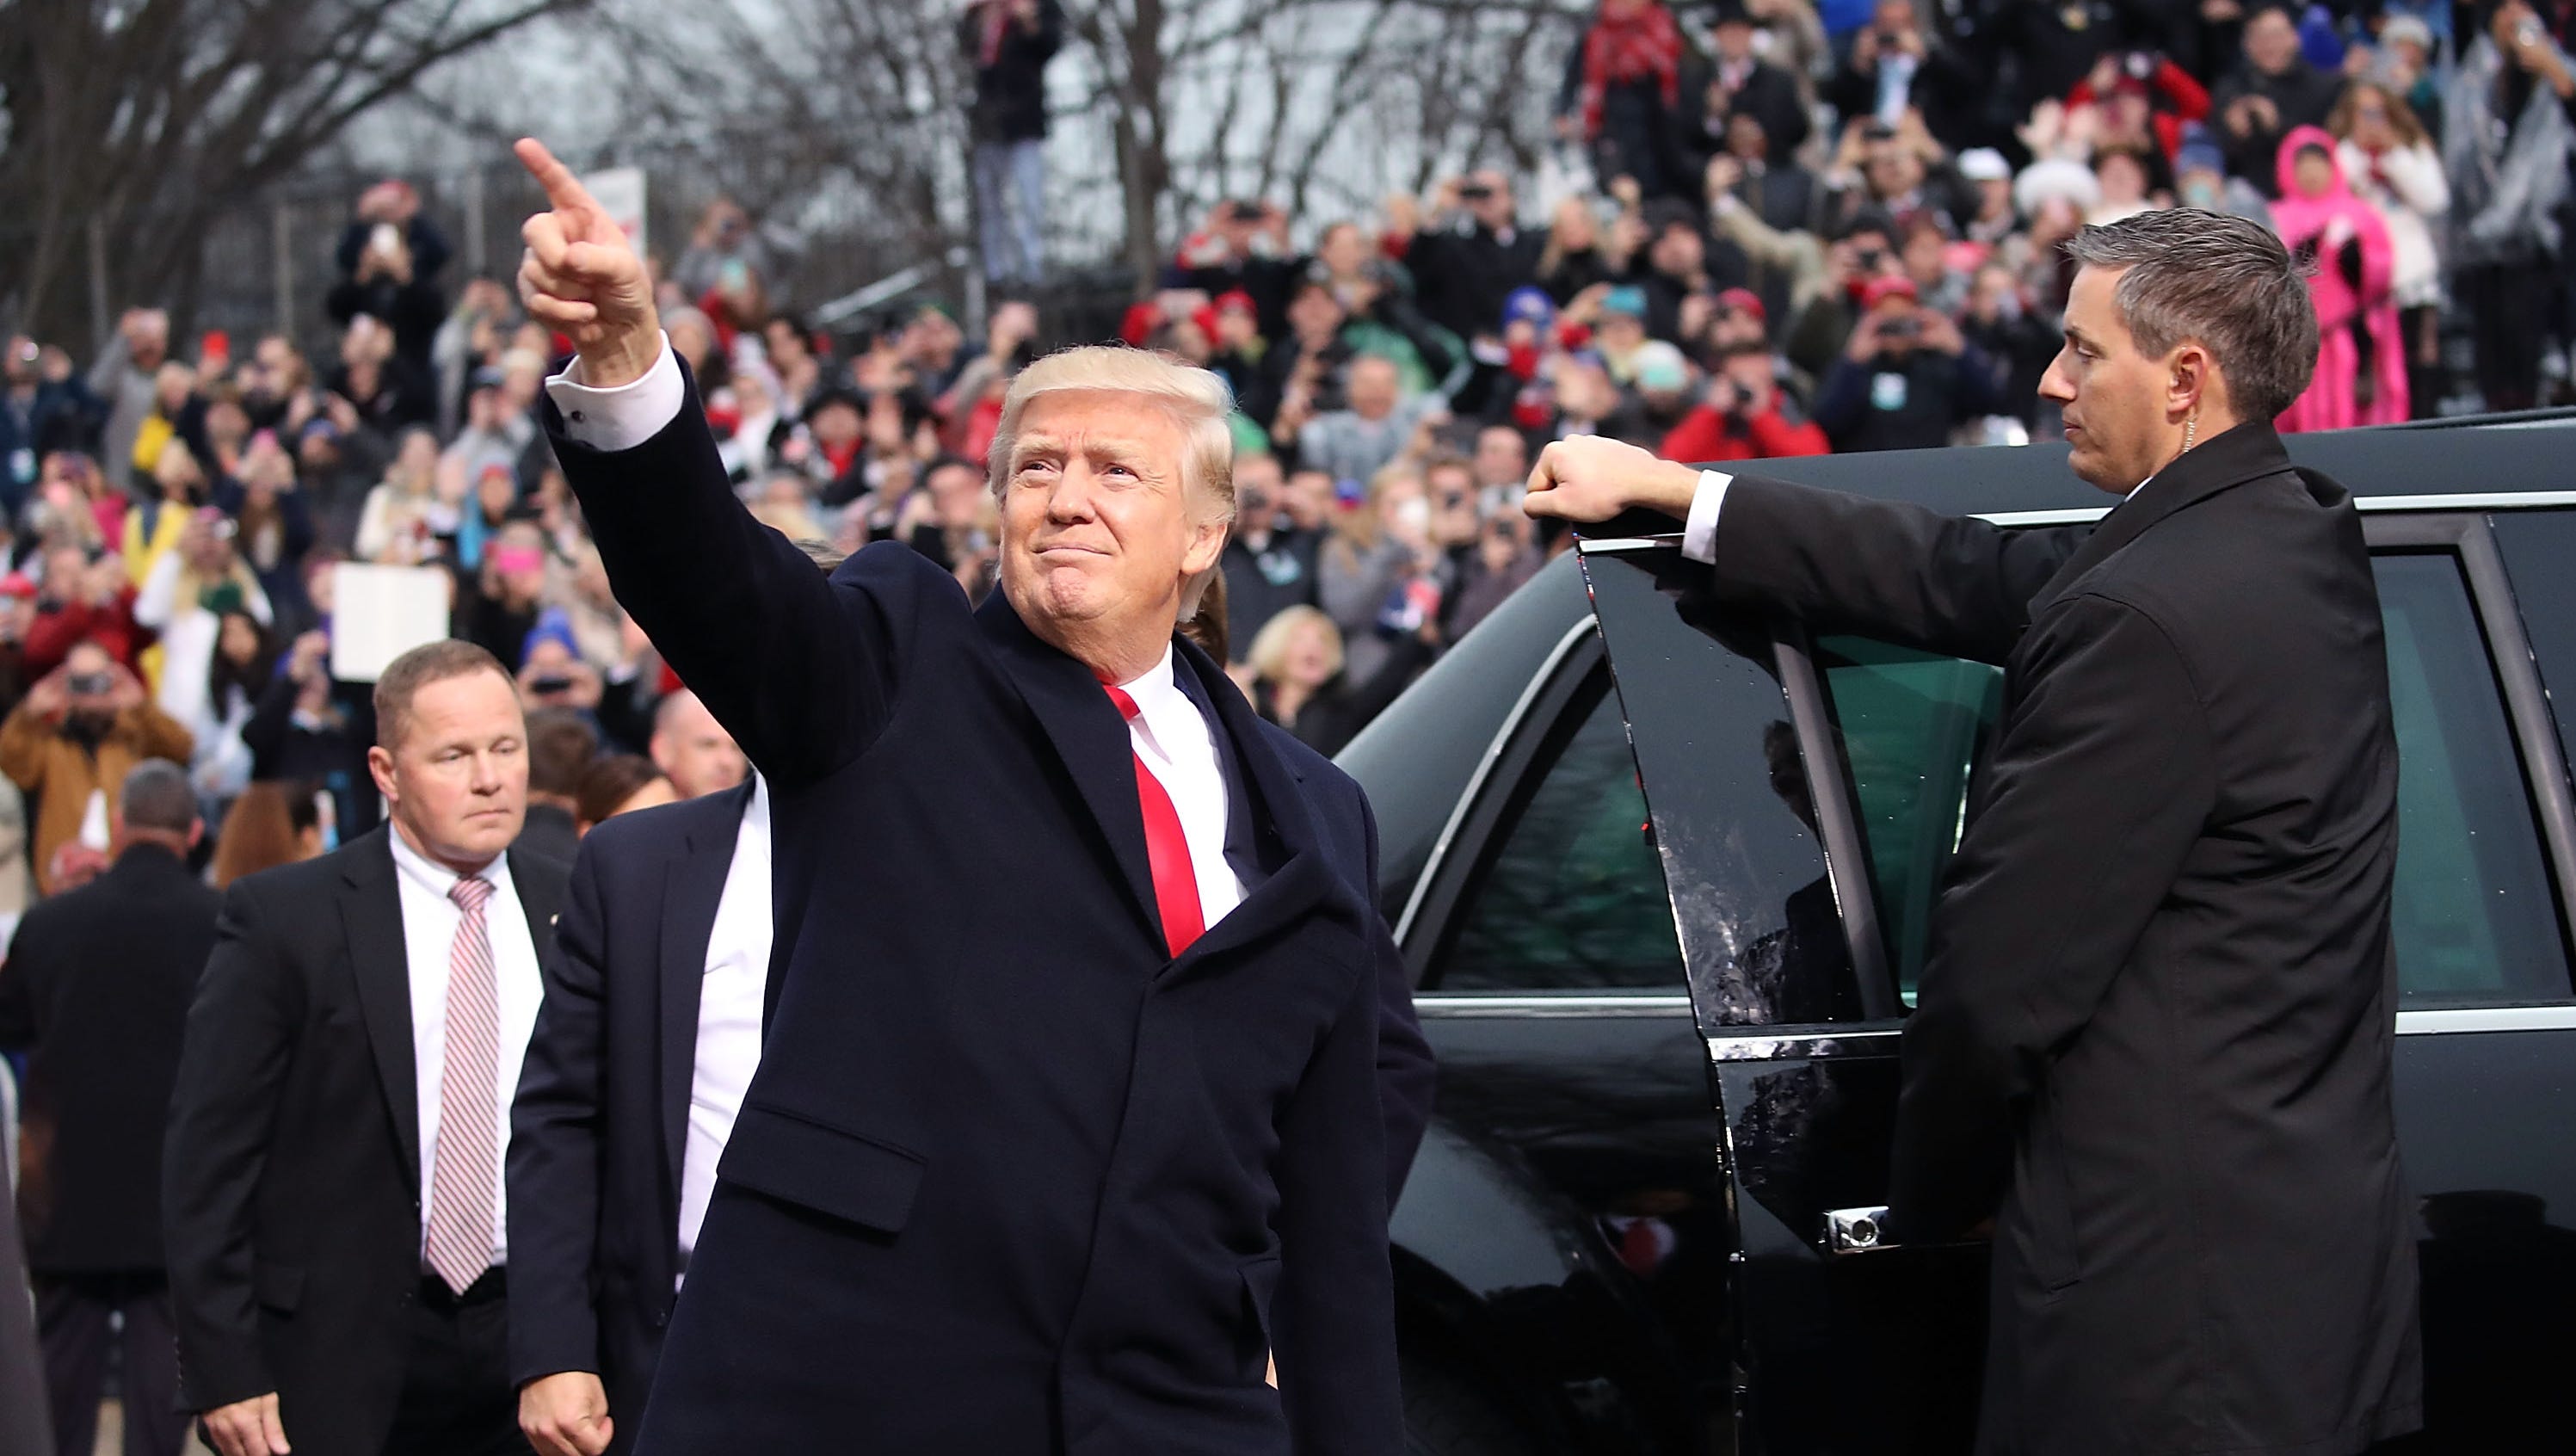 President Trump's Inauguration Day All the highlights